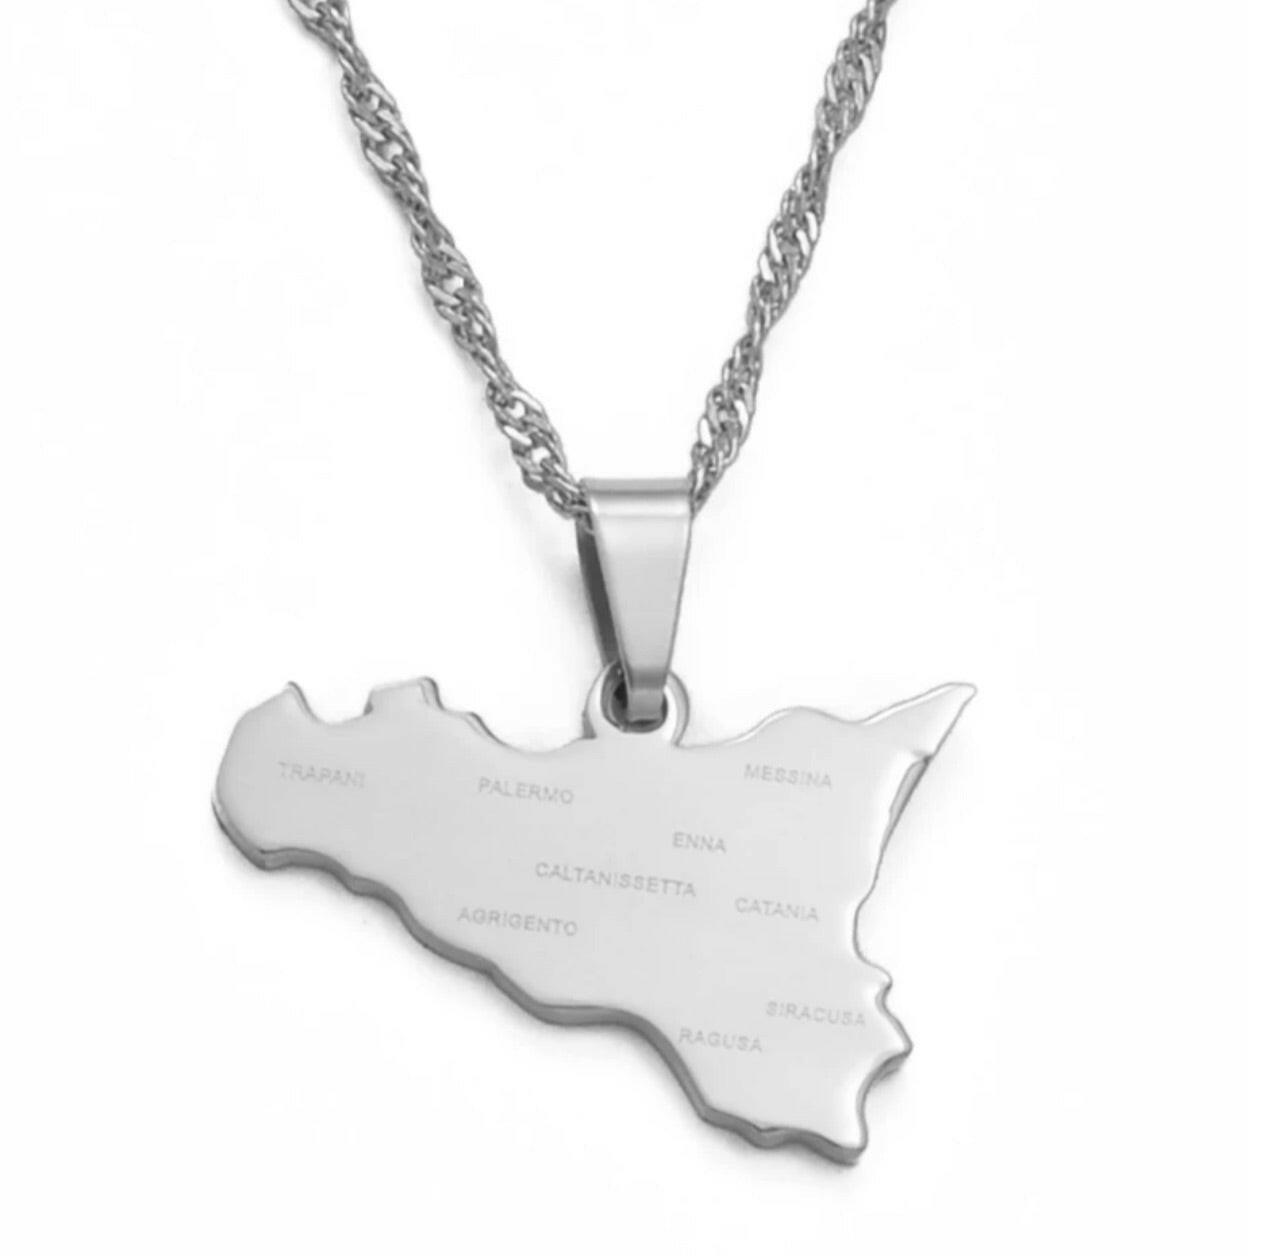 Sicilian Necklace in Stainless Steel with Sicilian Cities.